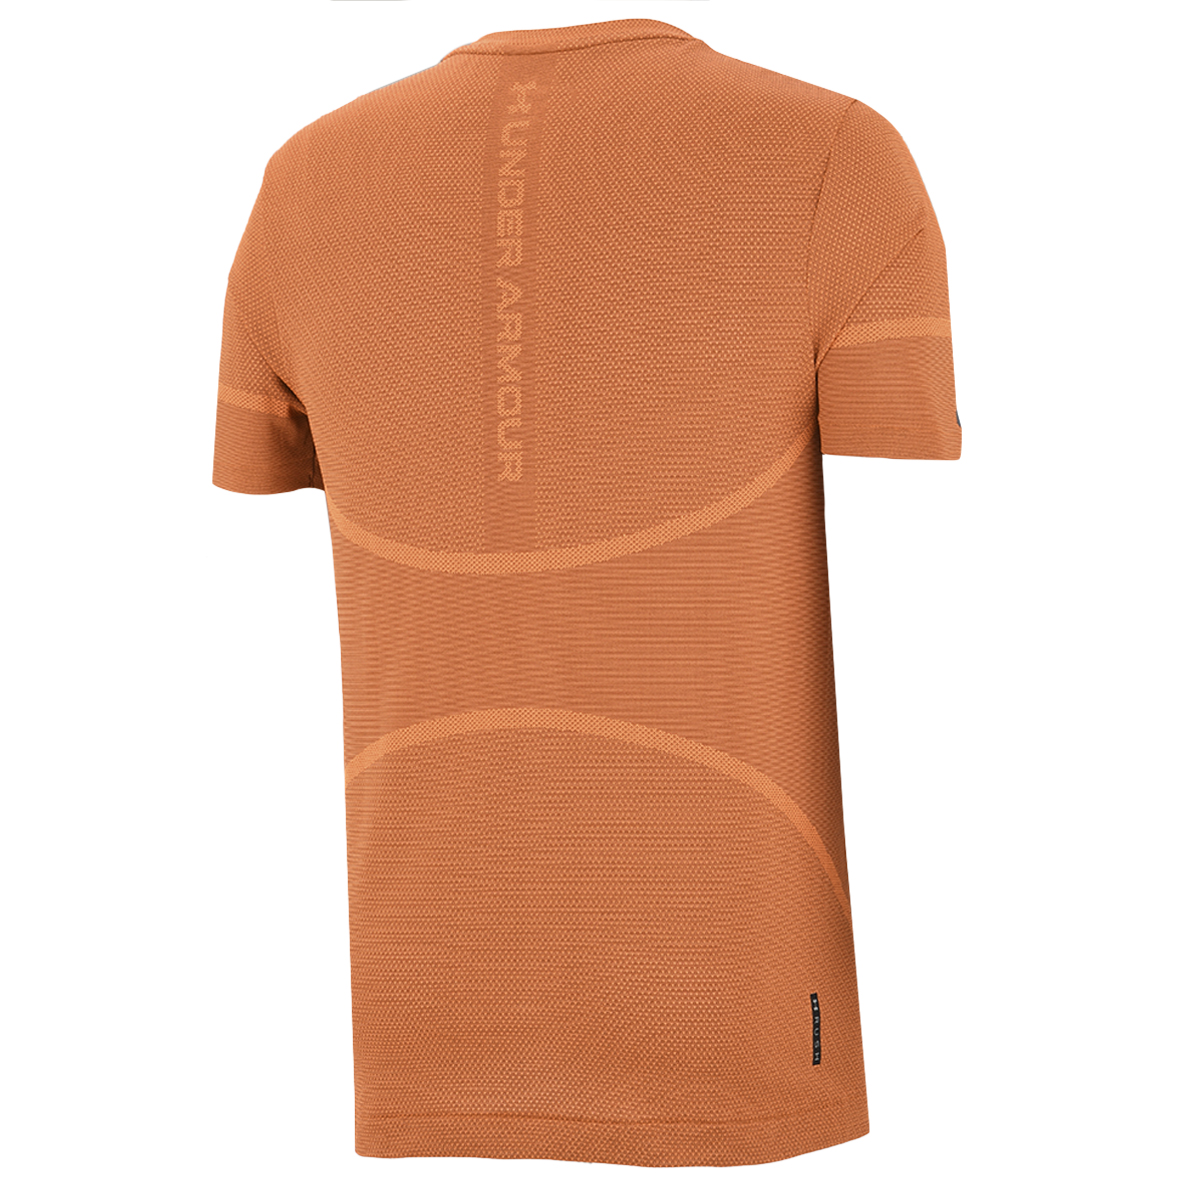 Remera Entrenamiento Under Armour Rush Legacy Hombre,  image number null